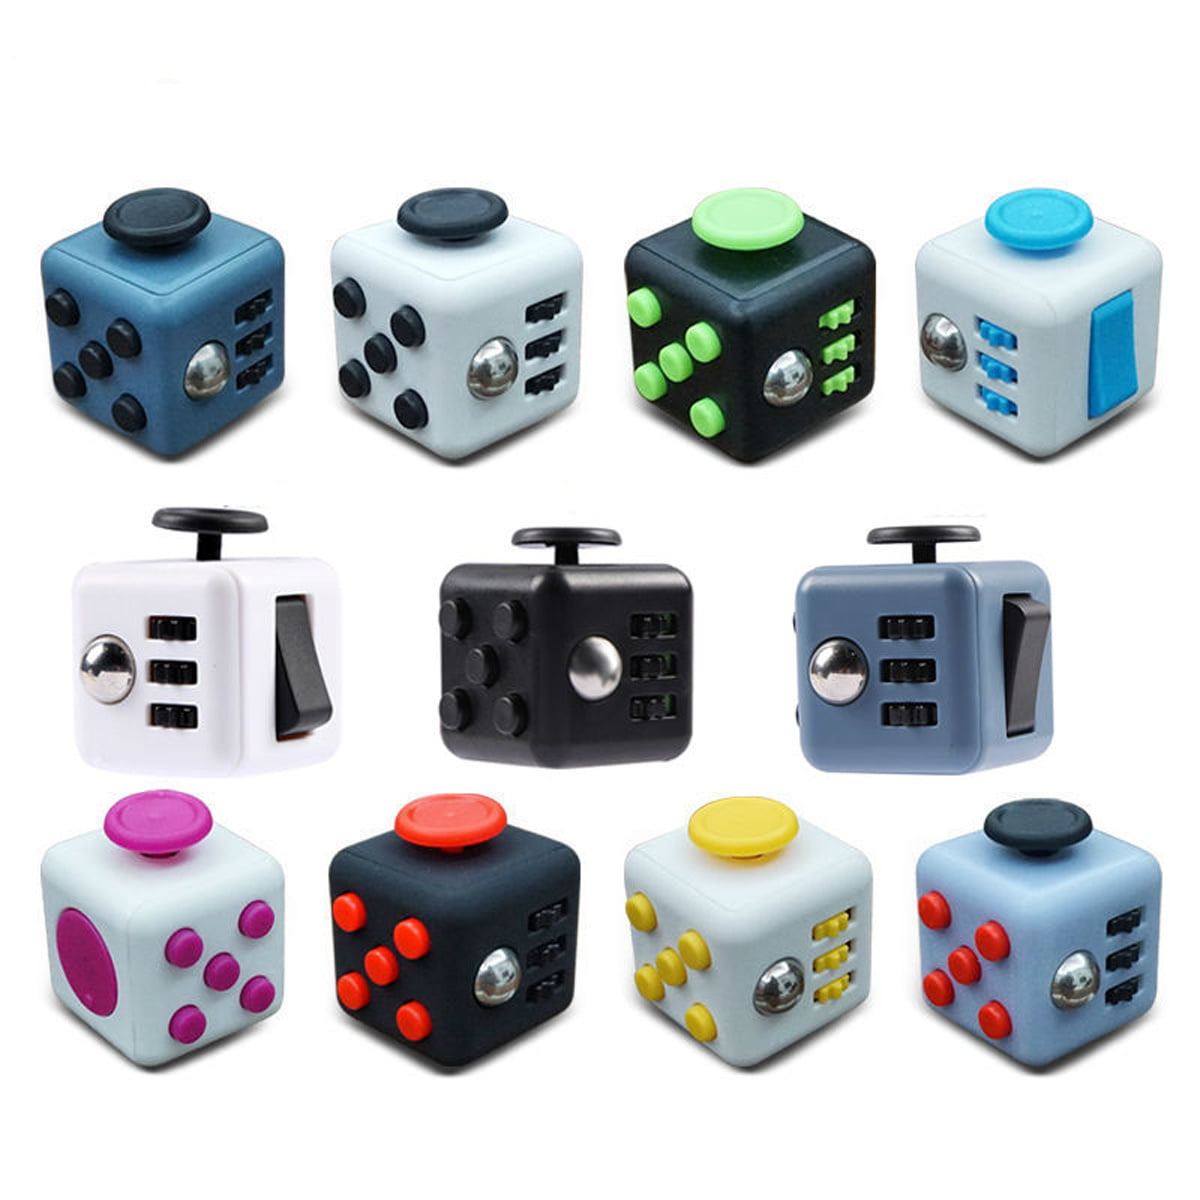 Dice Magic 3 FIDGET CUBES Desk Toy Stress Anxiety Relief Focus Gift Adult Kid 